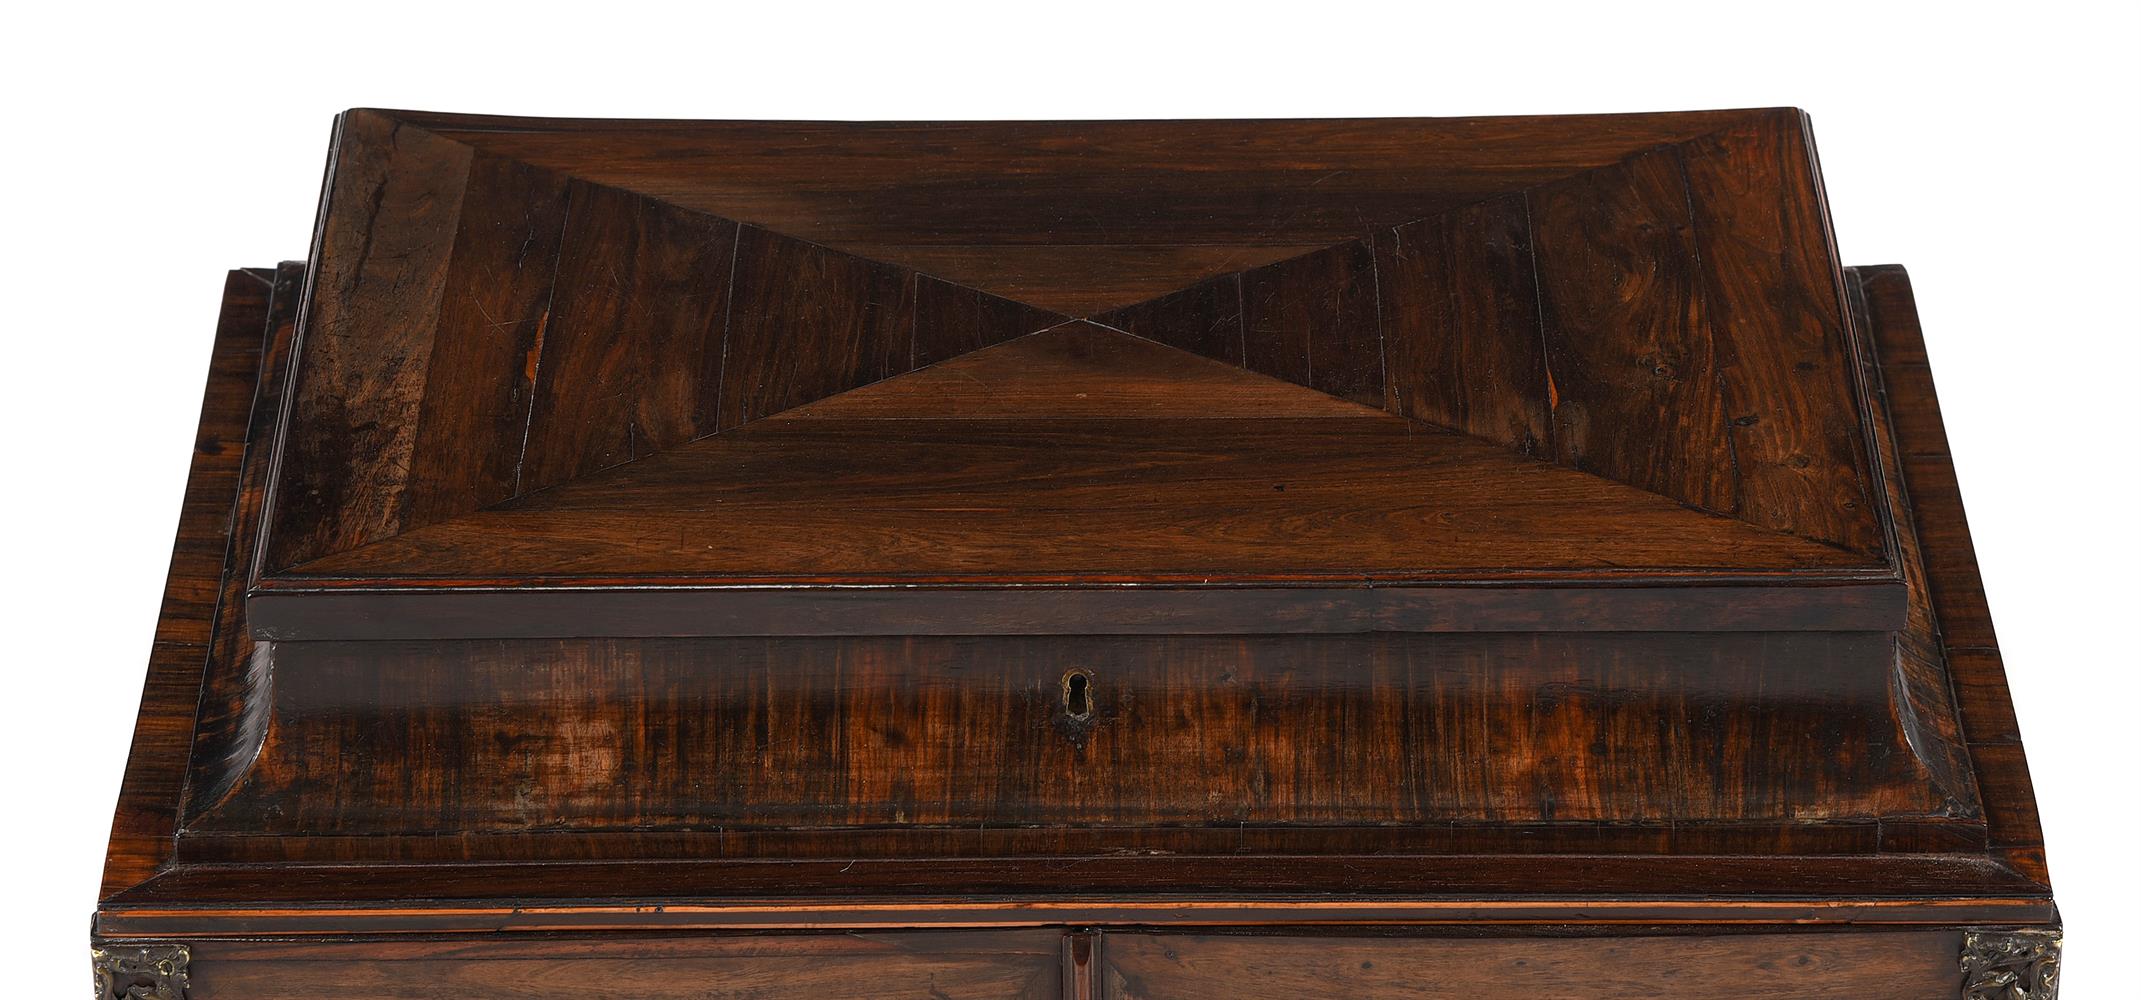 Y A ROSEWOOD AND EXOTIC TIMBER TABLE CABINET, PROBABLY INDO-PORTUGUESE - Image 4 of 5